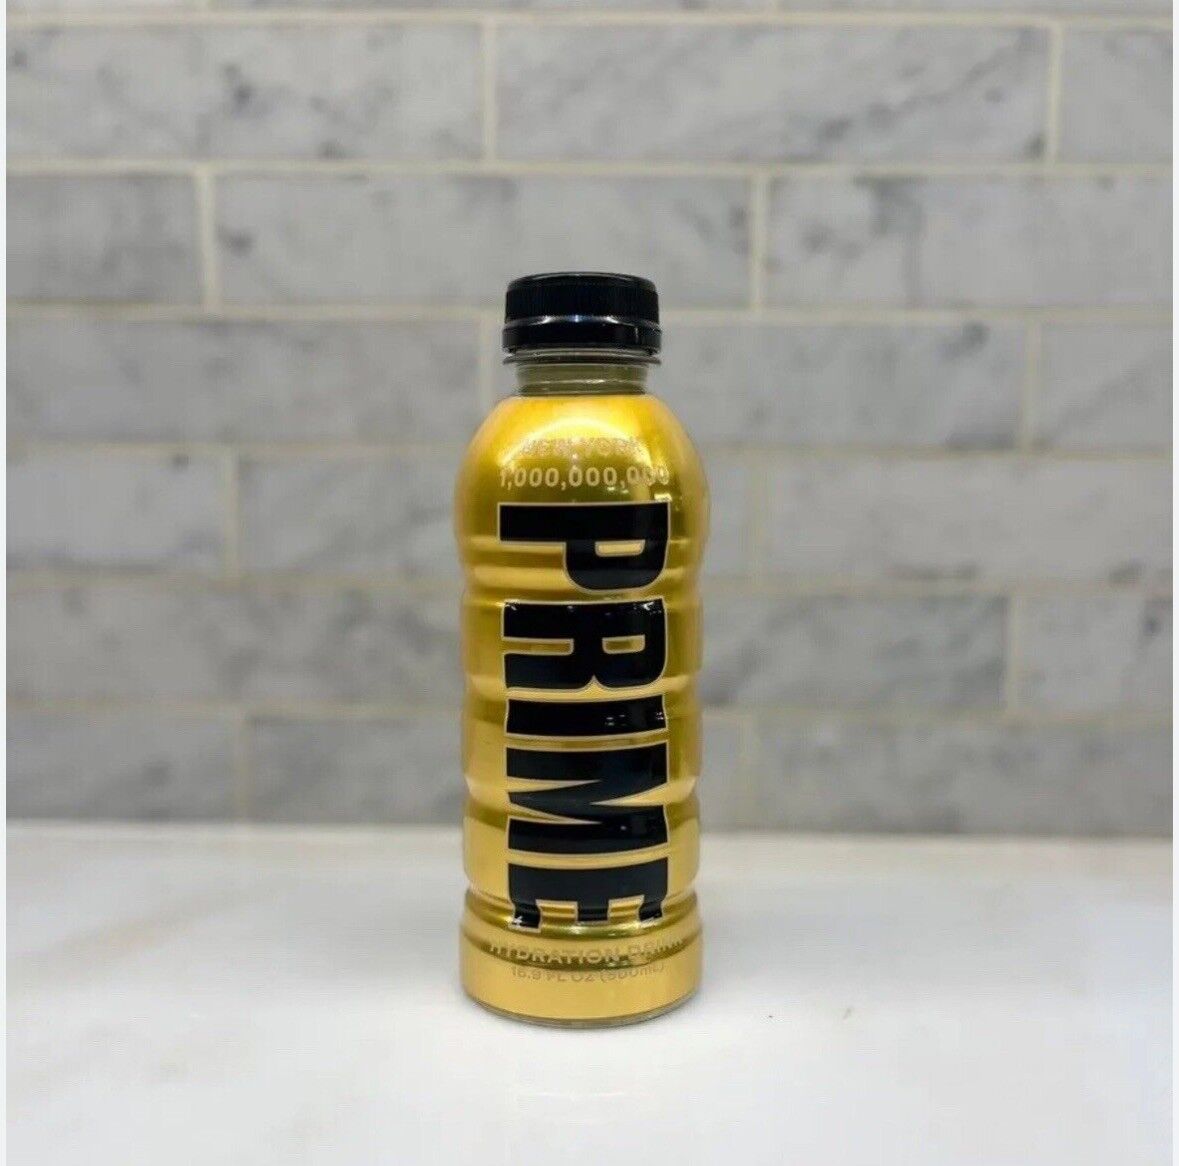 NEW LIMITED NYC EDITION PRIME HYDRATION DRINK 1 BILLION GOLD. AVAILABLE IN BULK